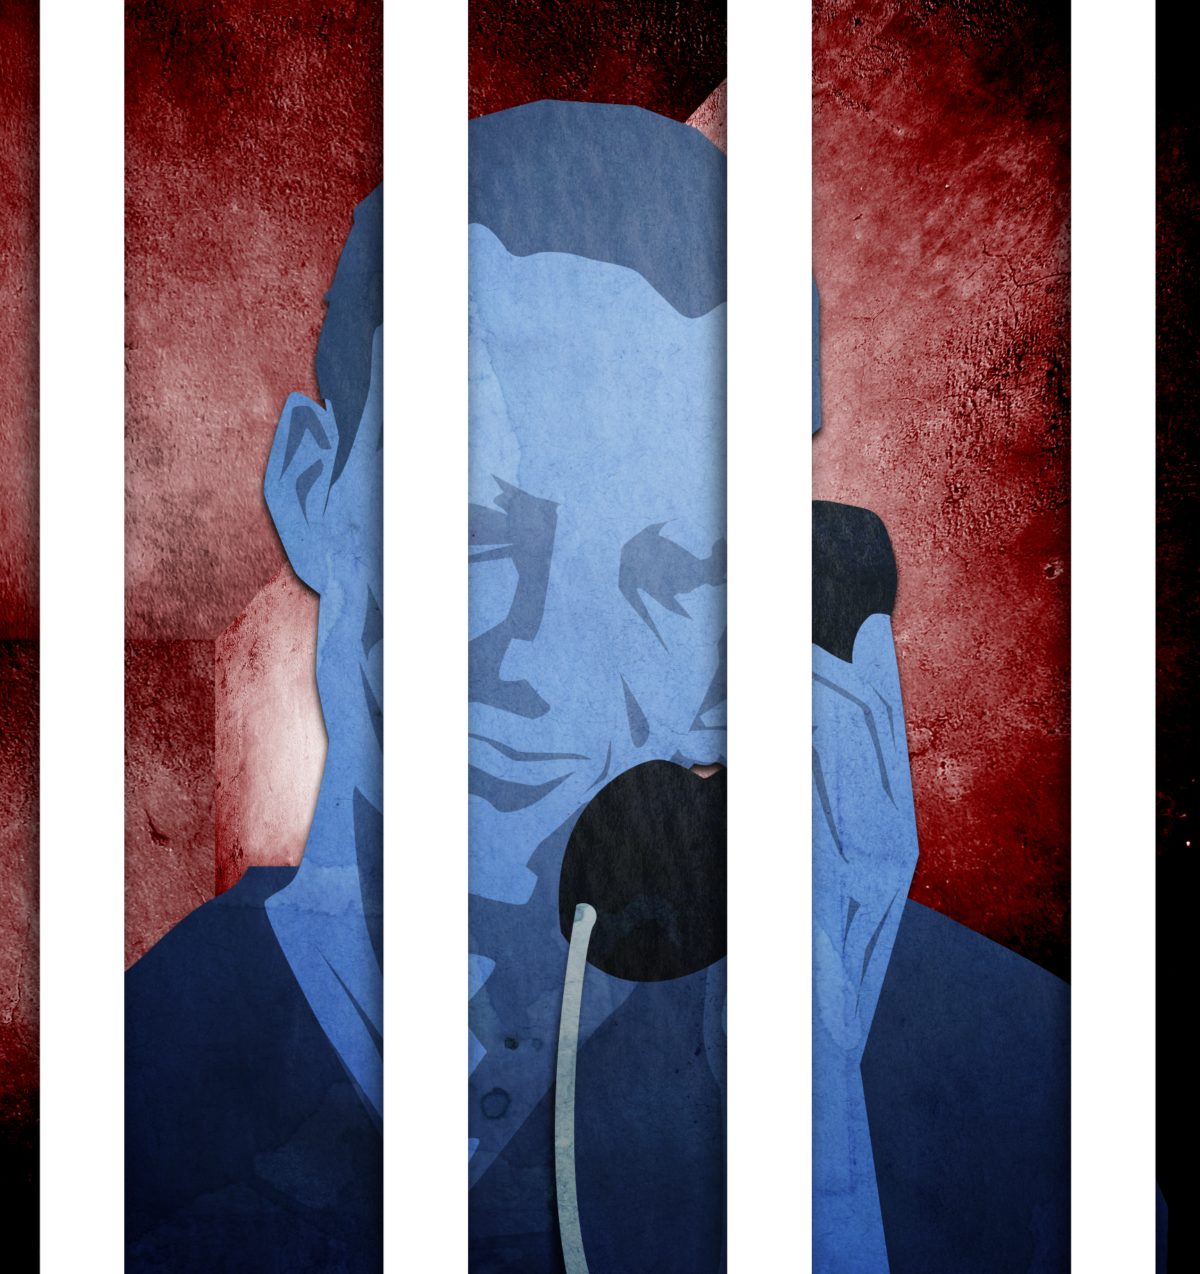 Calling from prison